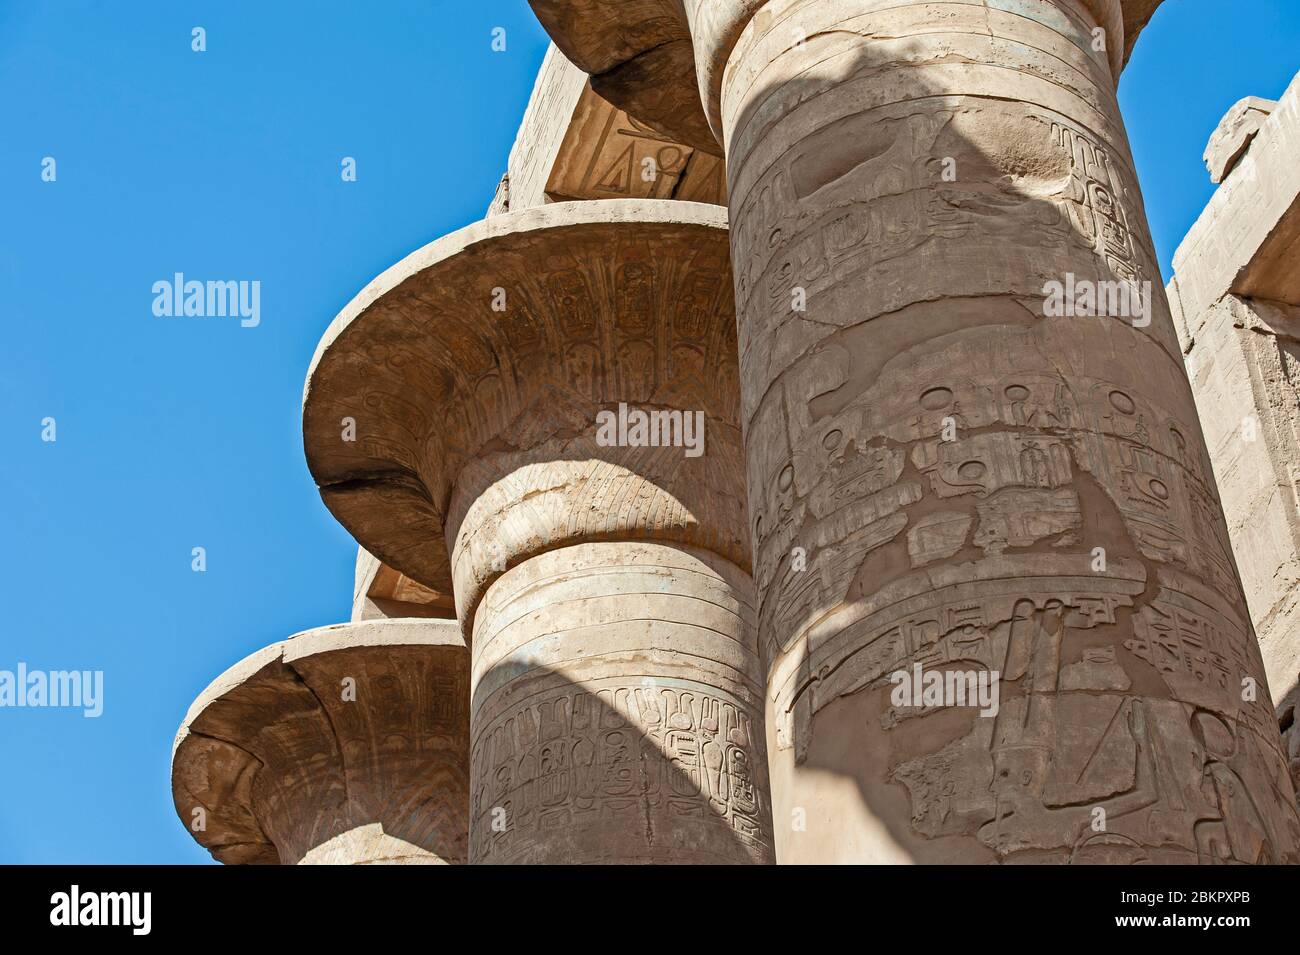 Hieroglypic carvings on columns at the ancient egyptian hypostyle hall of Karnak temple in Luxor Stock Photo